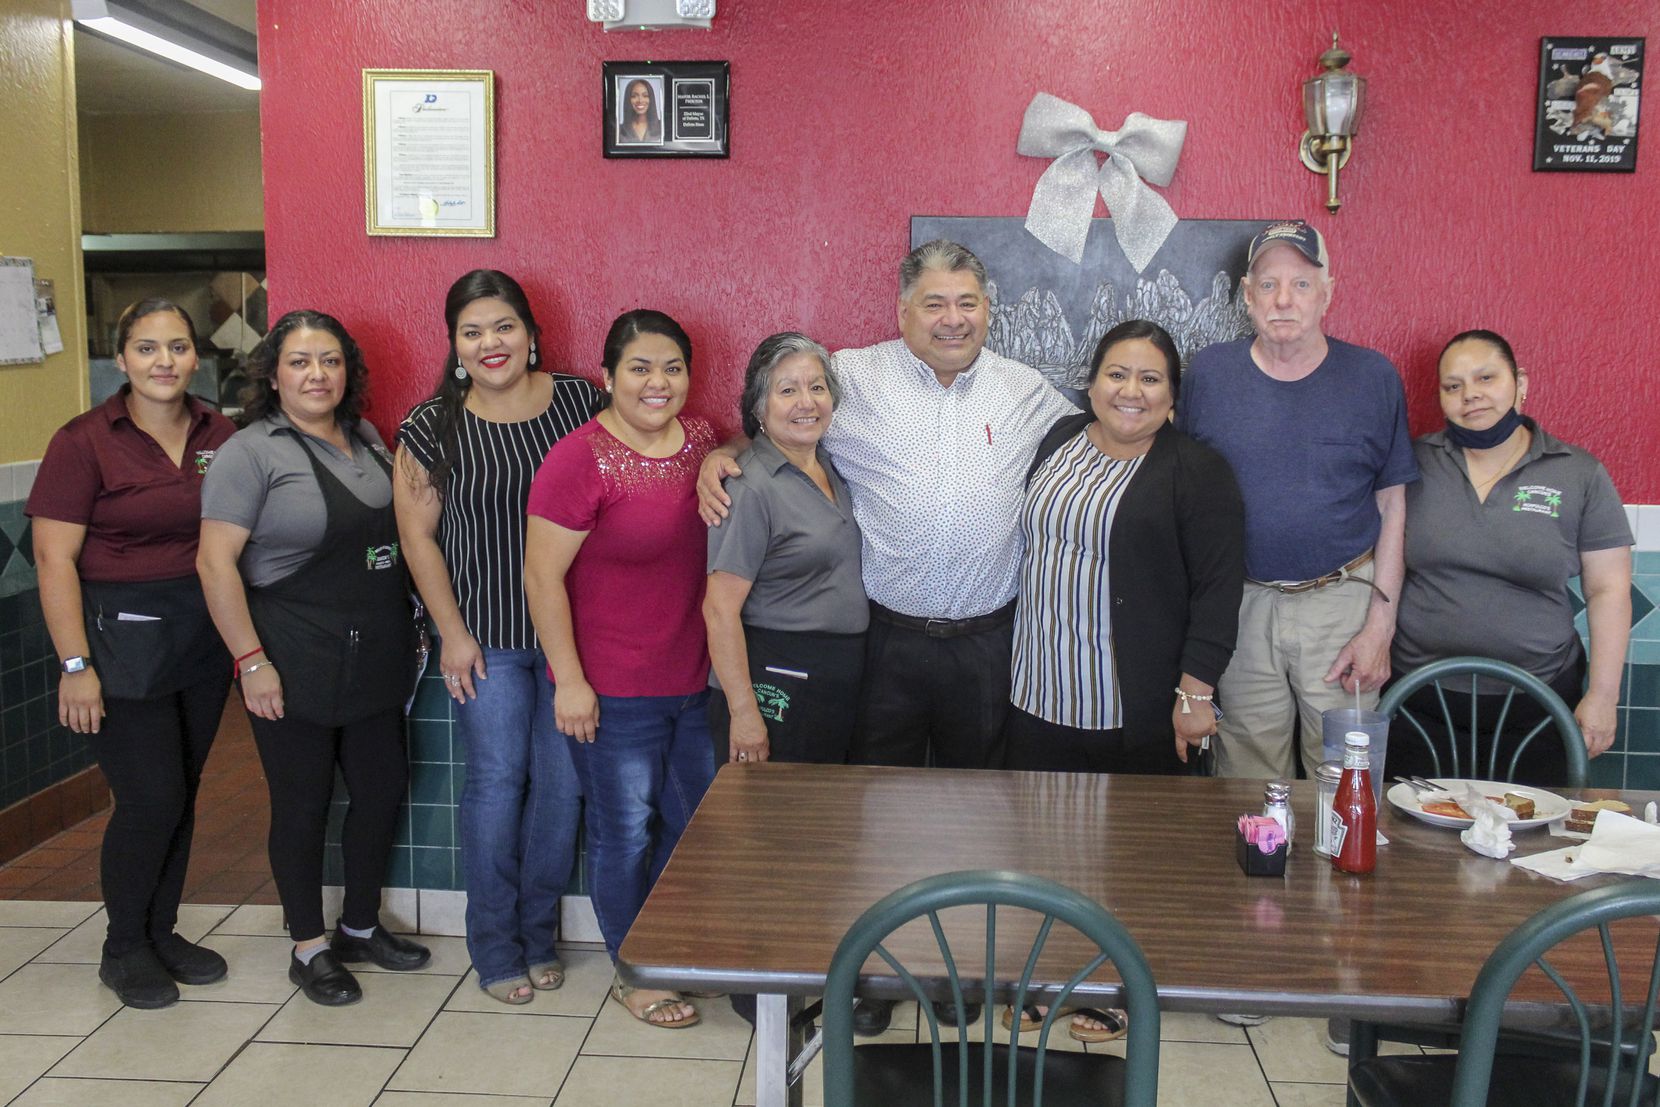 The staff of Acapulco’s stands with owner Refugio “Cuco” Bahena at Acapulco's in DeSoto, Texas on Thursday, June 10, 2021. (Elias Valverde II / Special Contributor)